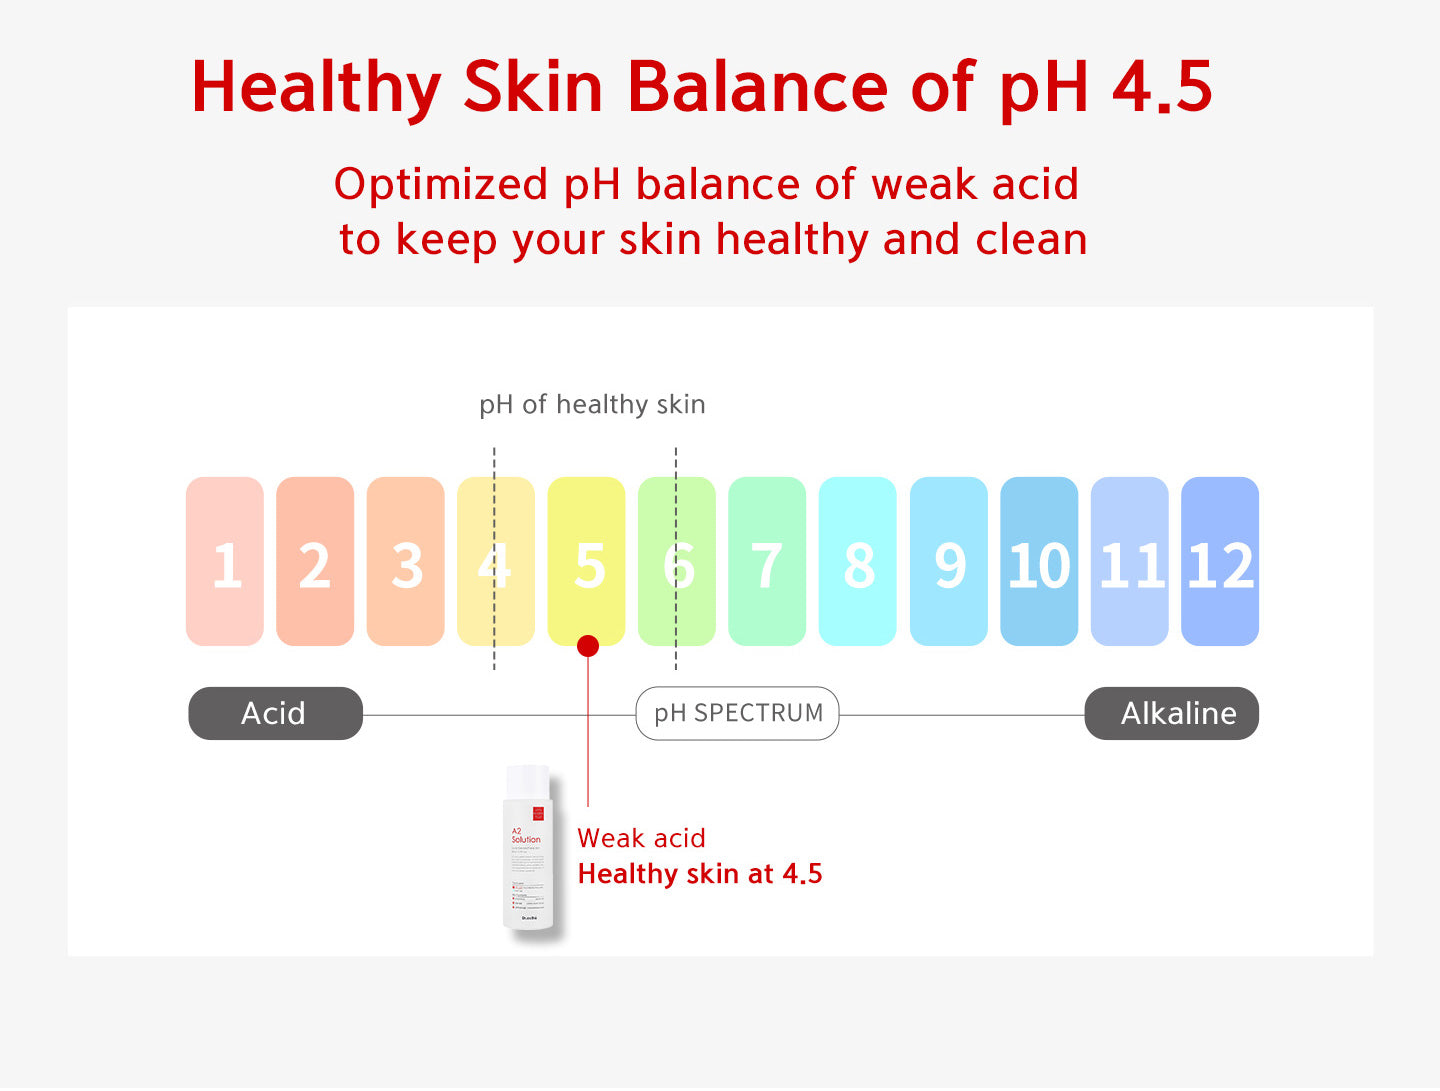 Healthy skin balance of pH 4.5. Optimized pH balance of weak acid to keep your skin healthy and clean. 